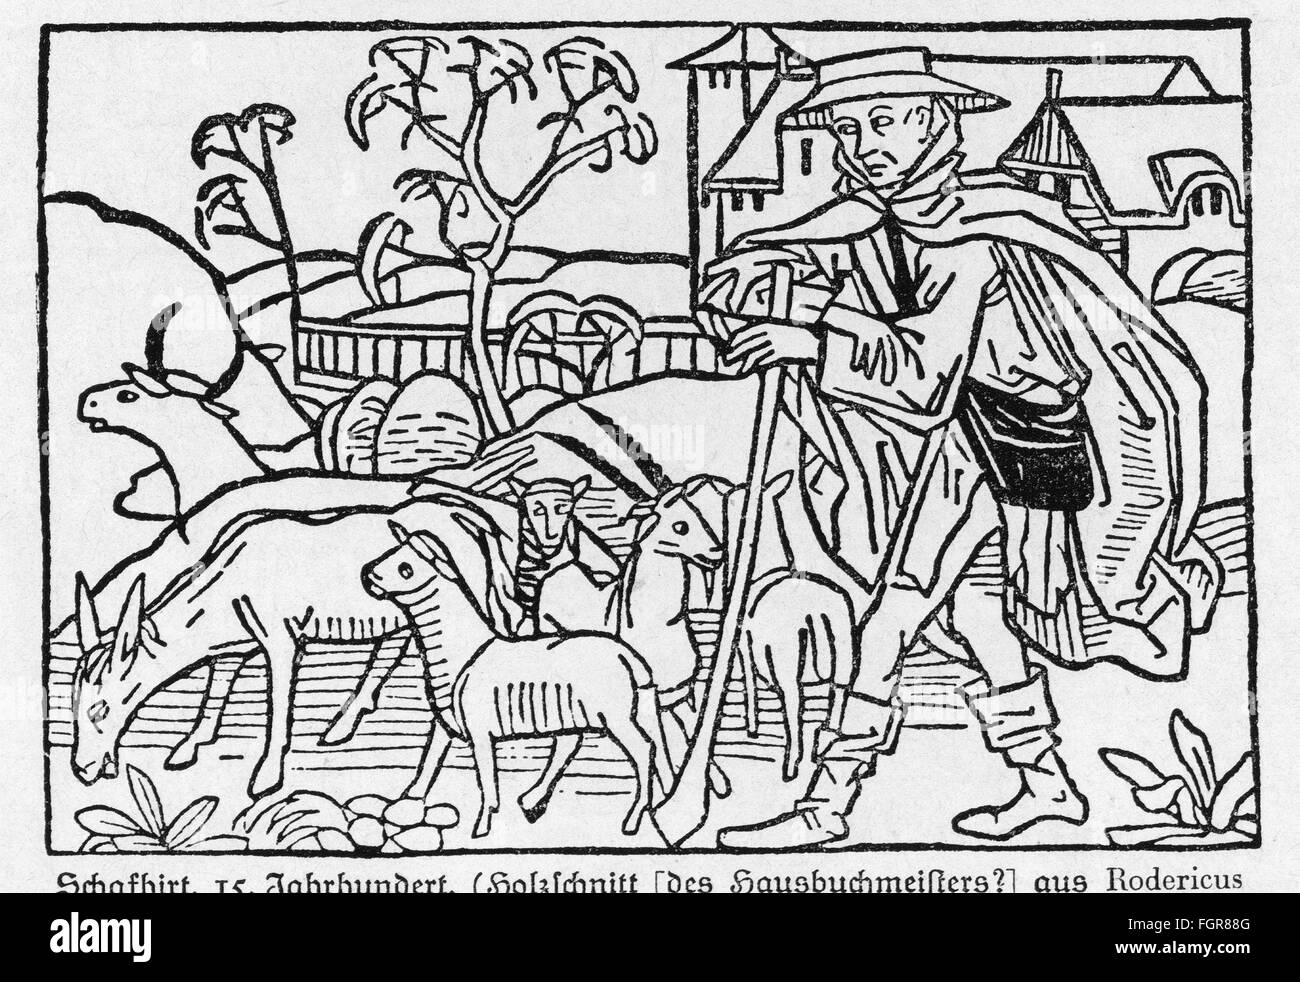 agriculture, stock farming, sheep, shepherd, 15th century, after woodcut, from: Rodericus Zamorensis, 'Speculum Vitae Humanae', Augsburg, 1475, wood engraving, 19th century, Additional-Rights-Clearences-Not Available Stock Photo